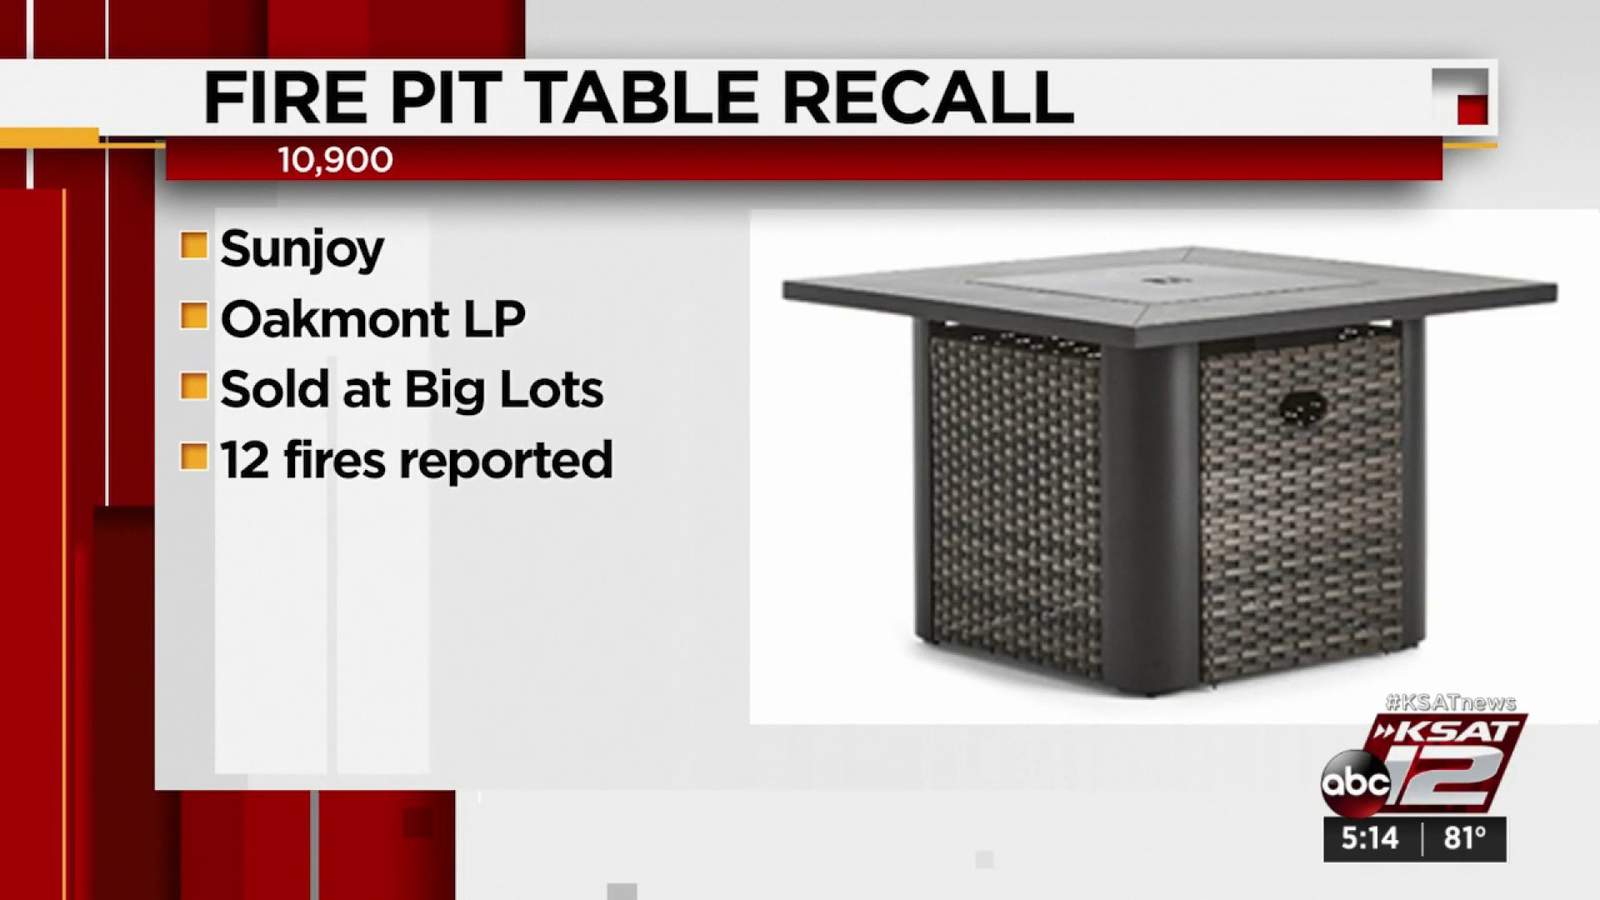 Fire pit tables, scented candles recalled